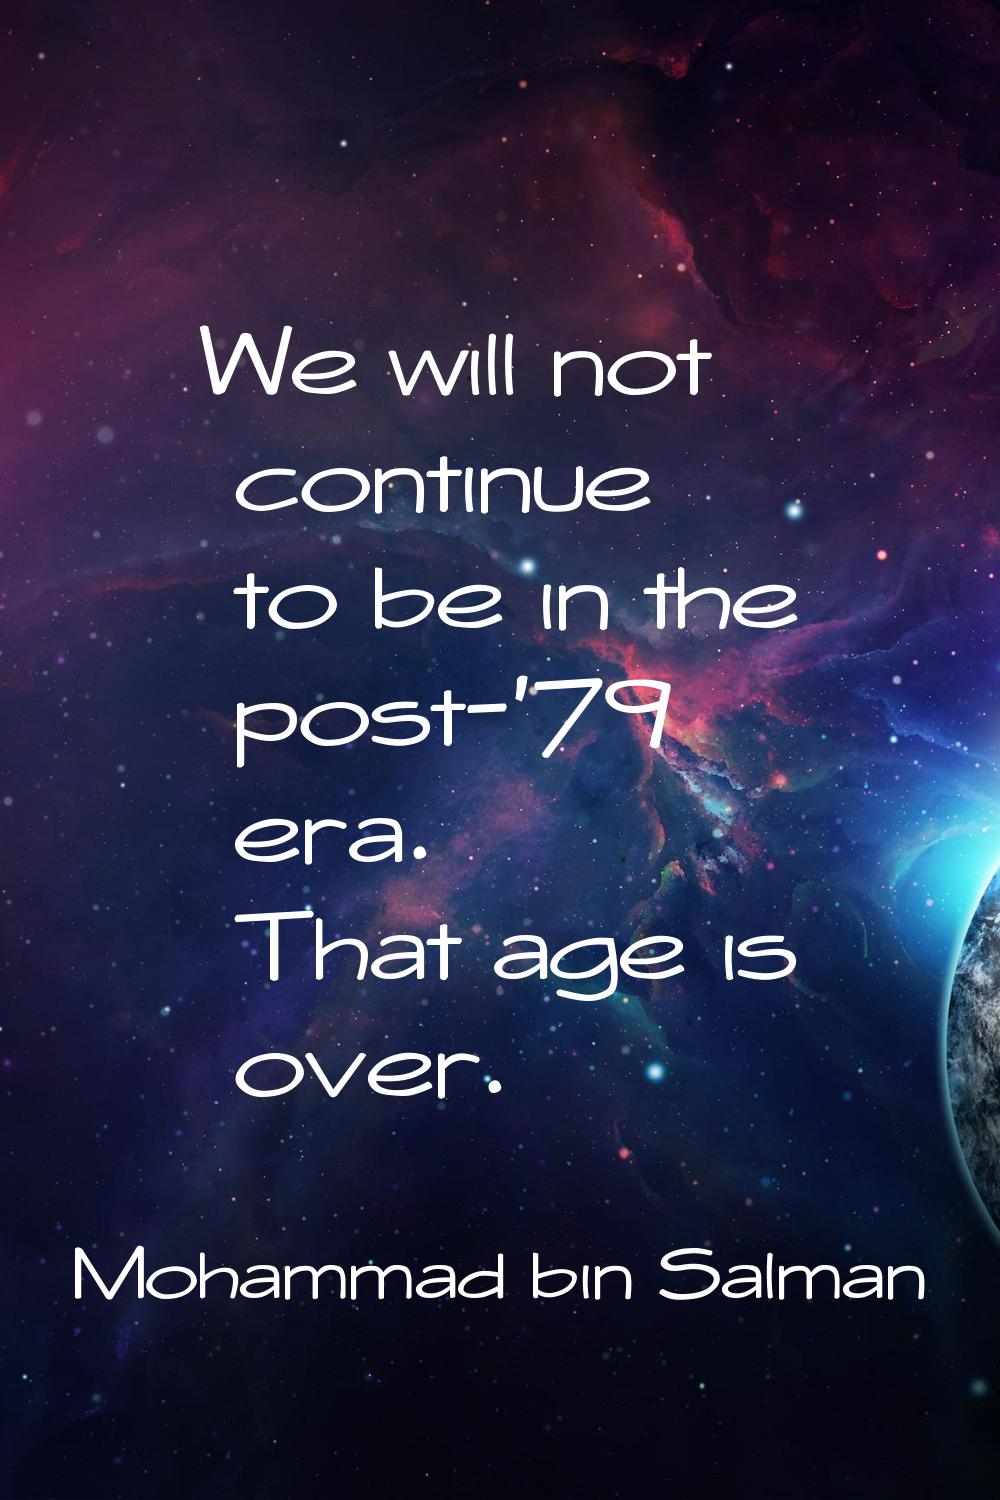 We will not continue to be in the post-'79 era. That age is over.